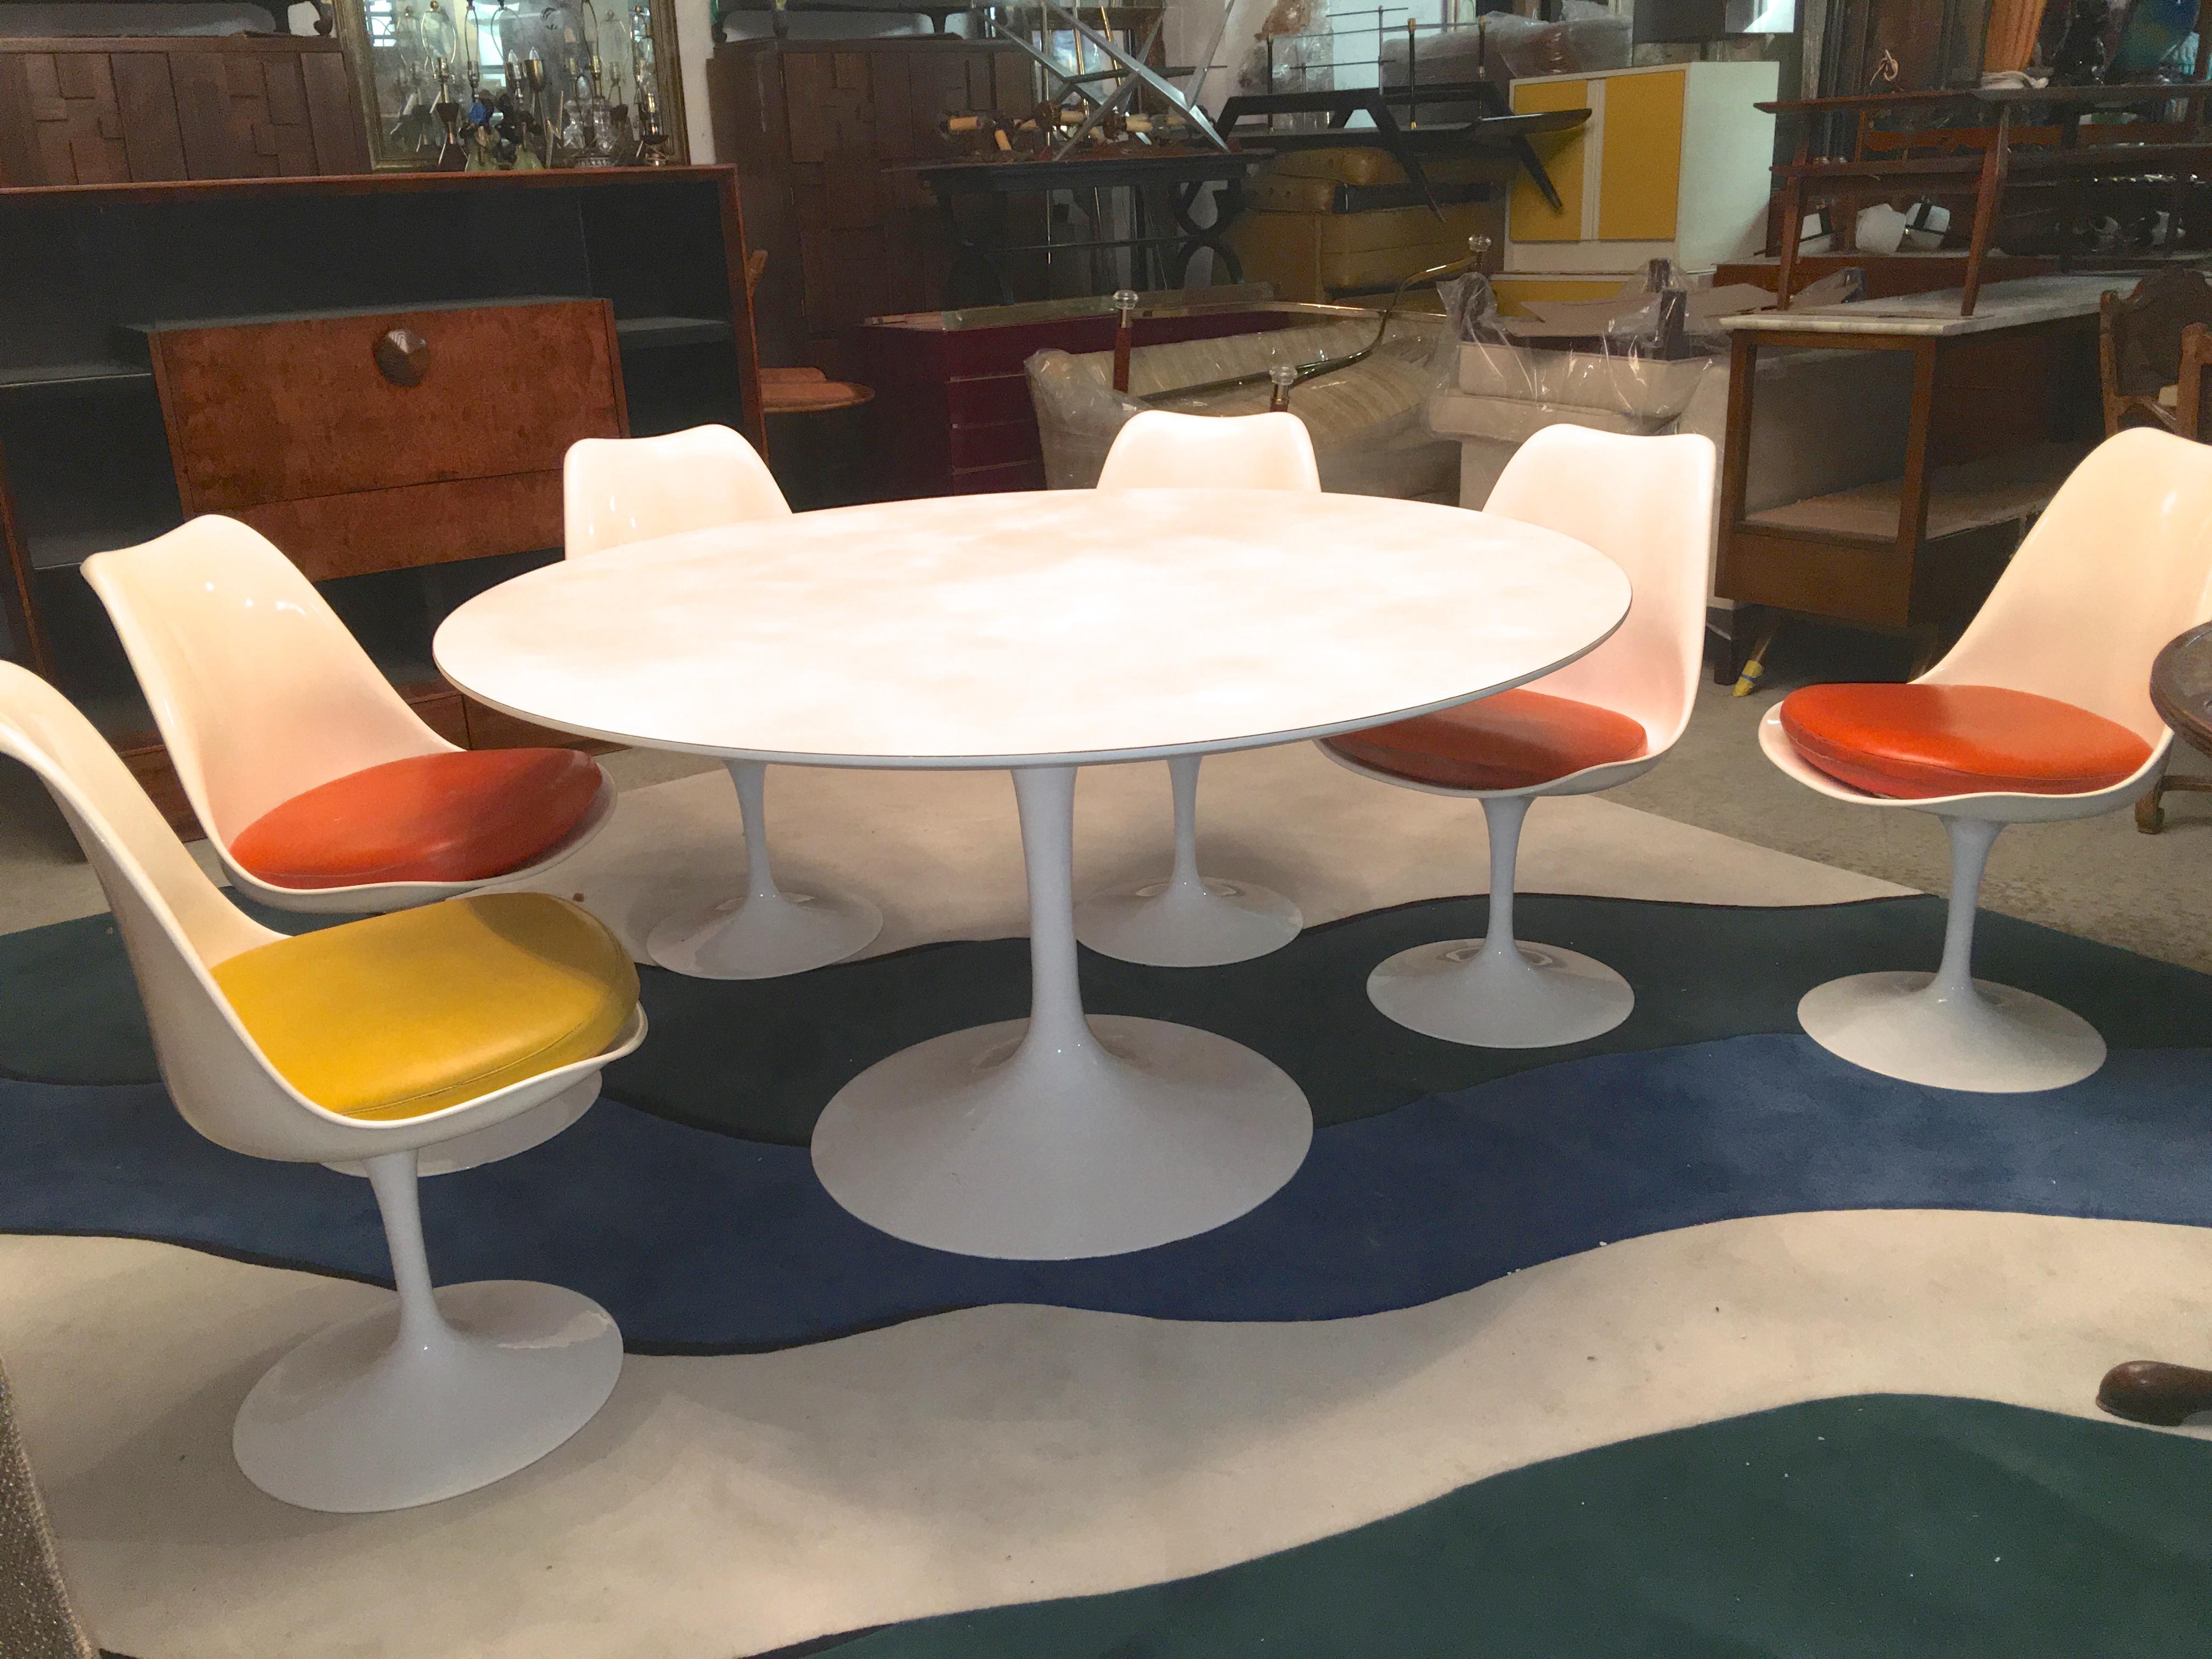 Restored vintage early 1960s Knoll production Eero Saarinen Tulip 54 inch diameter round white laminate tabletop. (Chairs are no longer available)
The cast aluminum tulip base of the table has been newly powder coated in high gloss white and looks